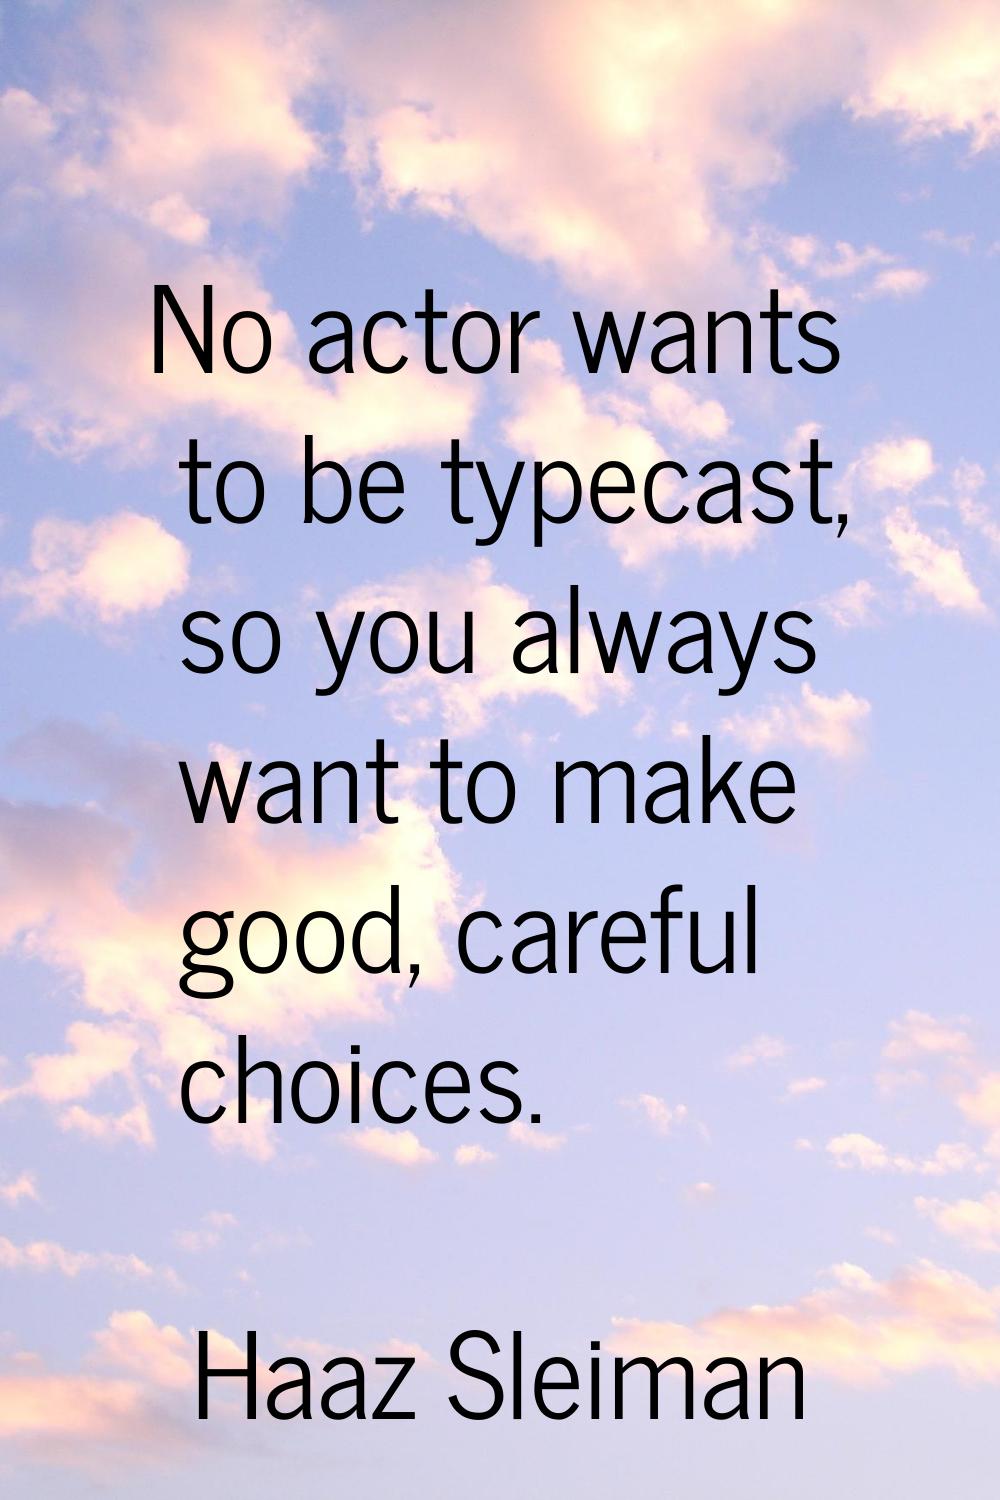 No actor wants to be typecast, so you always want to make good, careful choices.